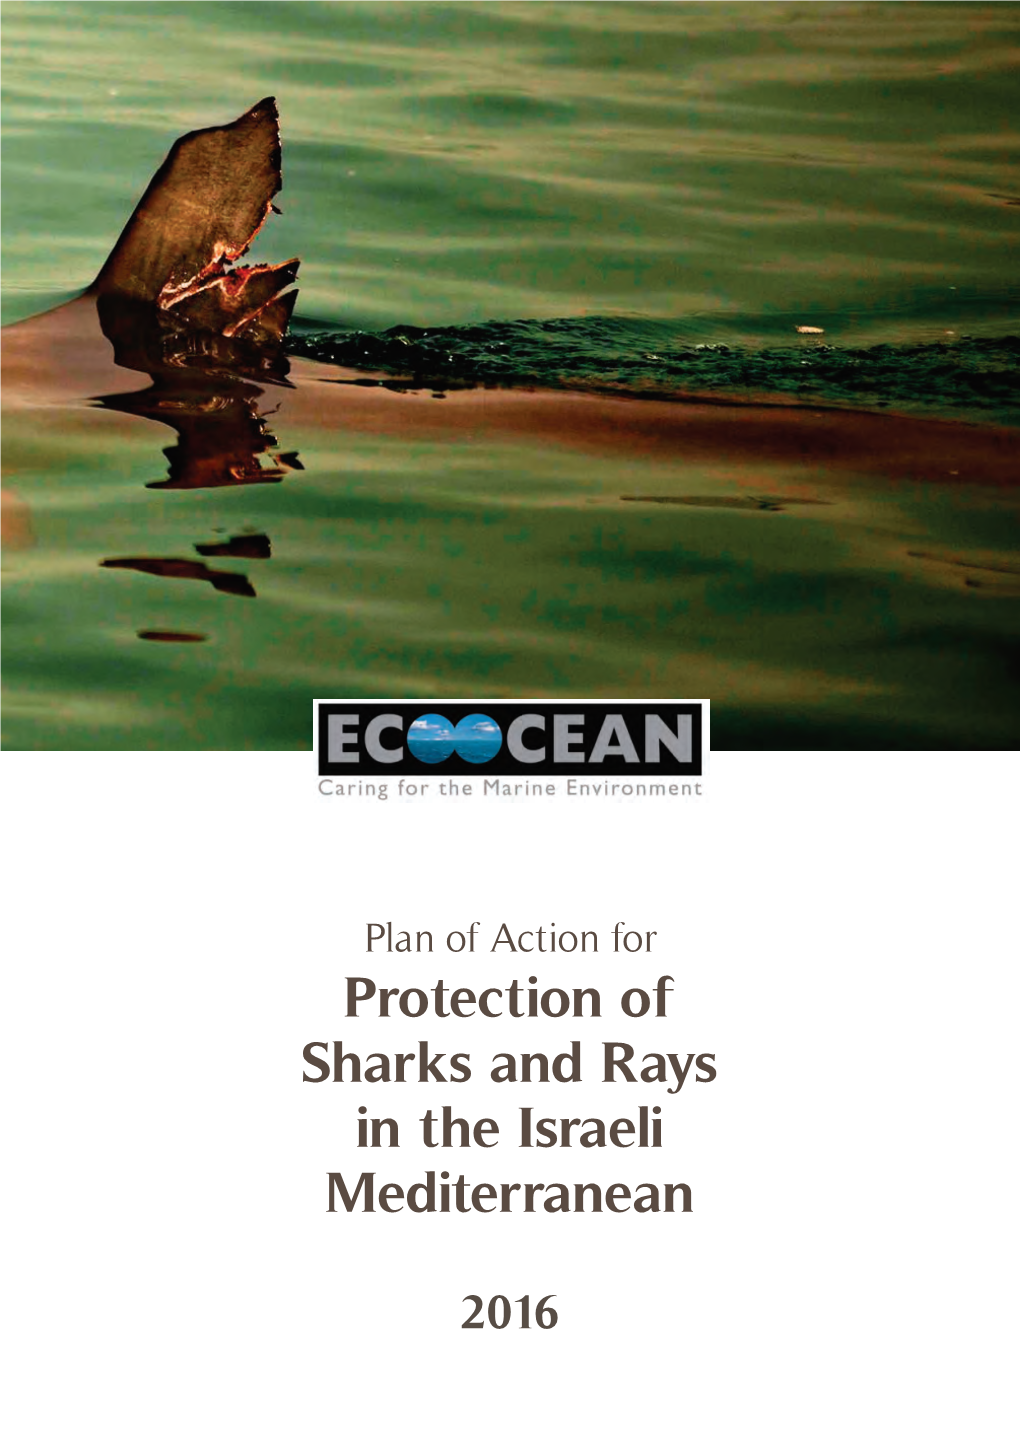 Protection of Sharks and Rays in the Israeli Mediterranean